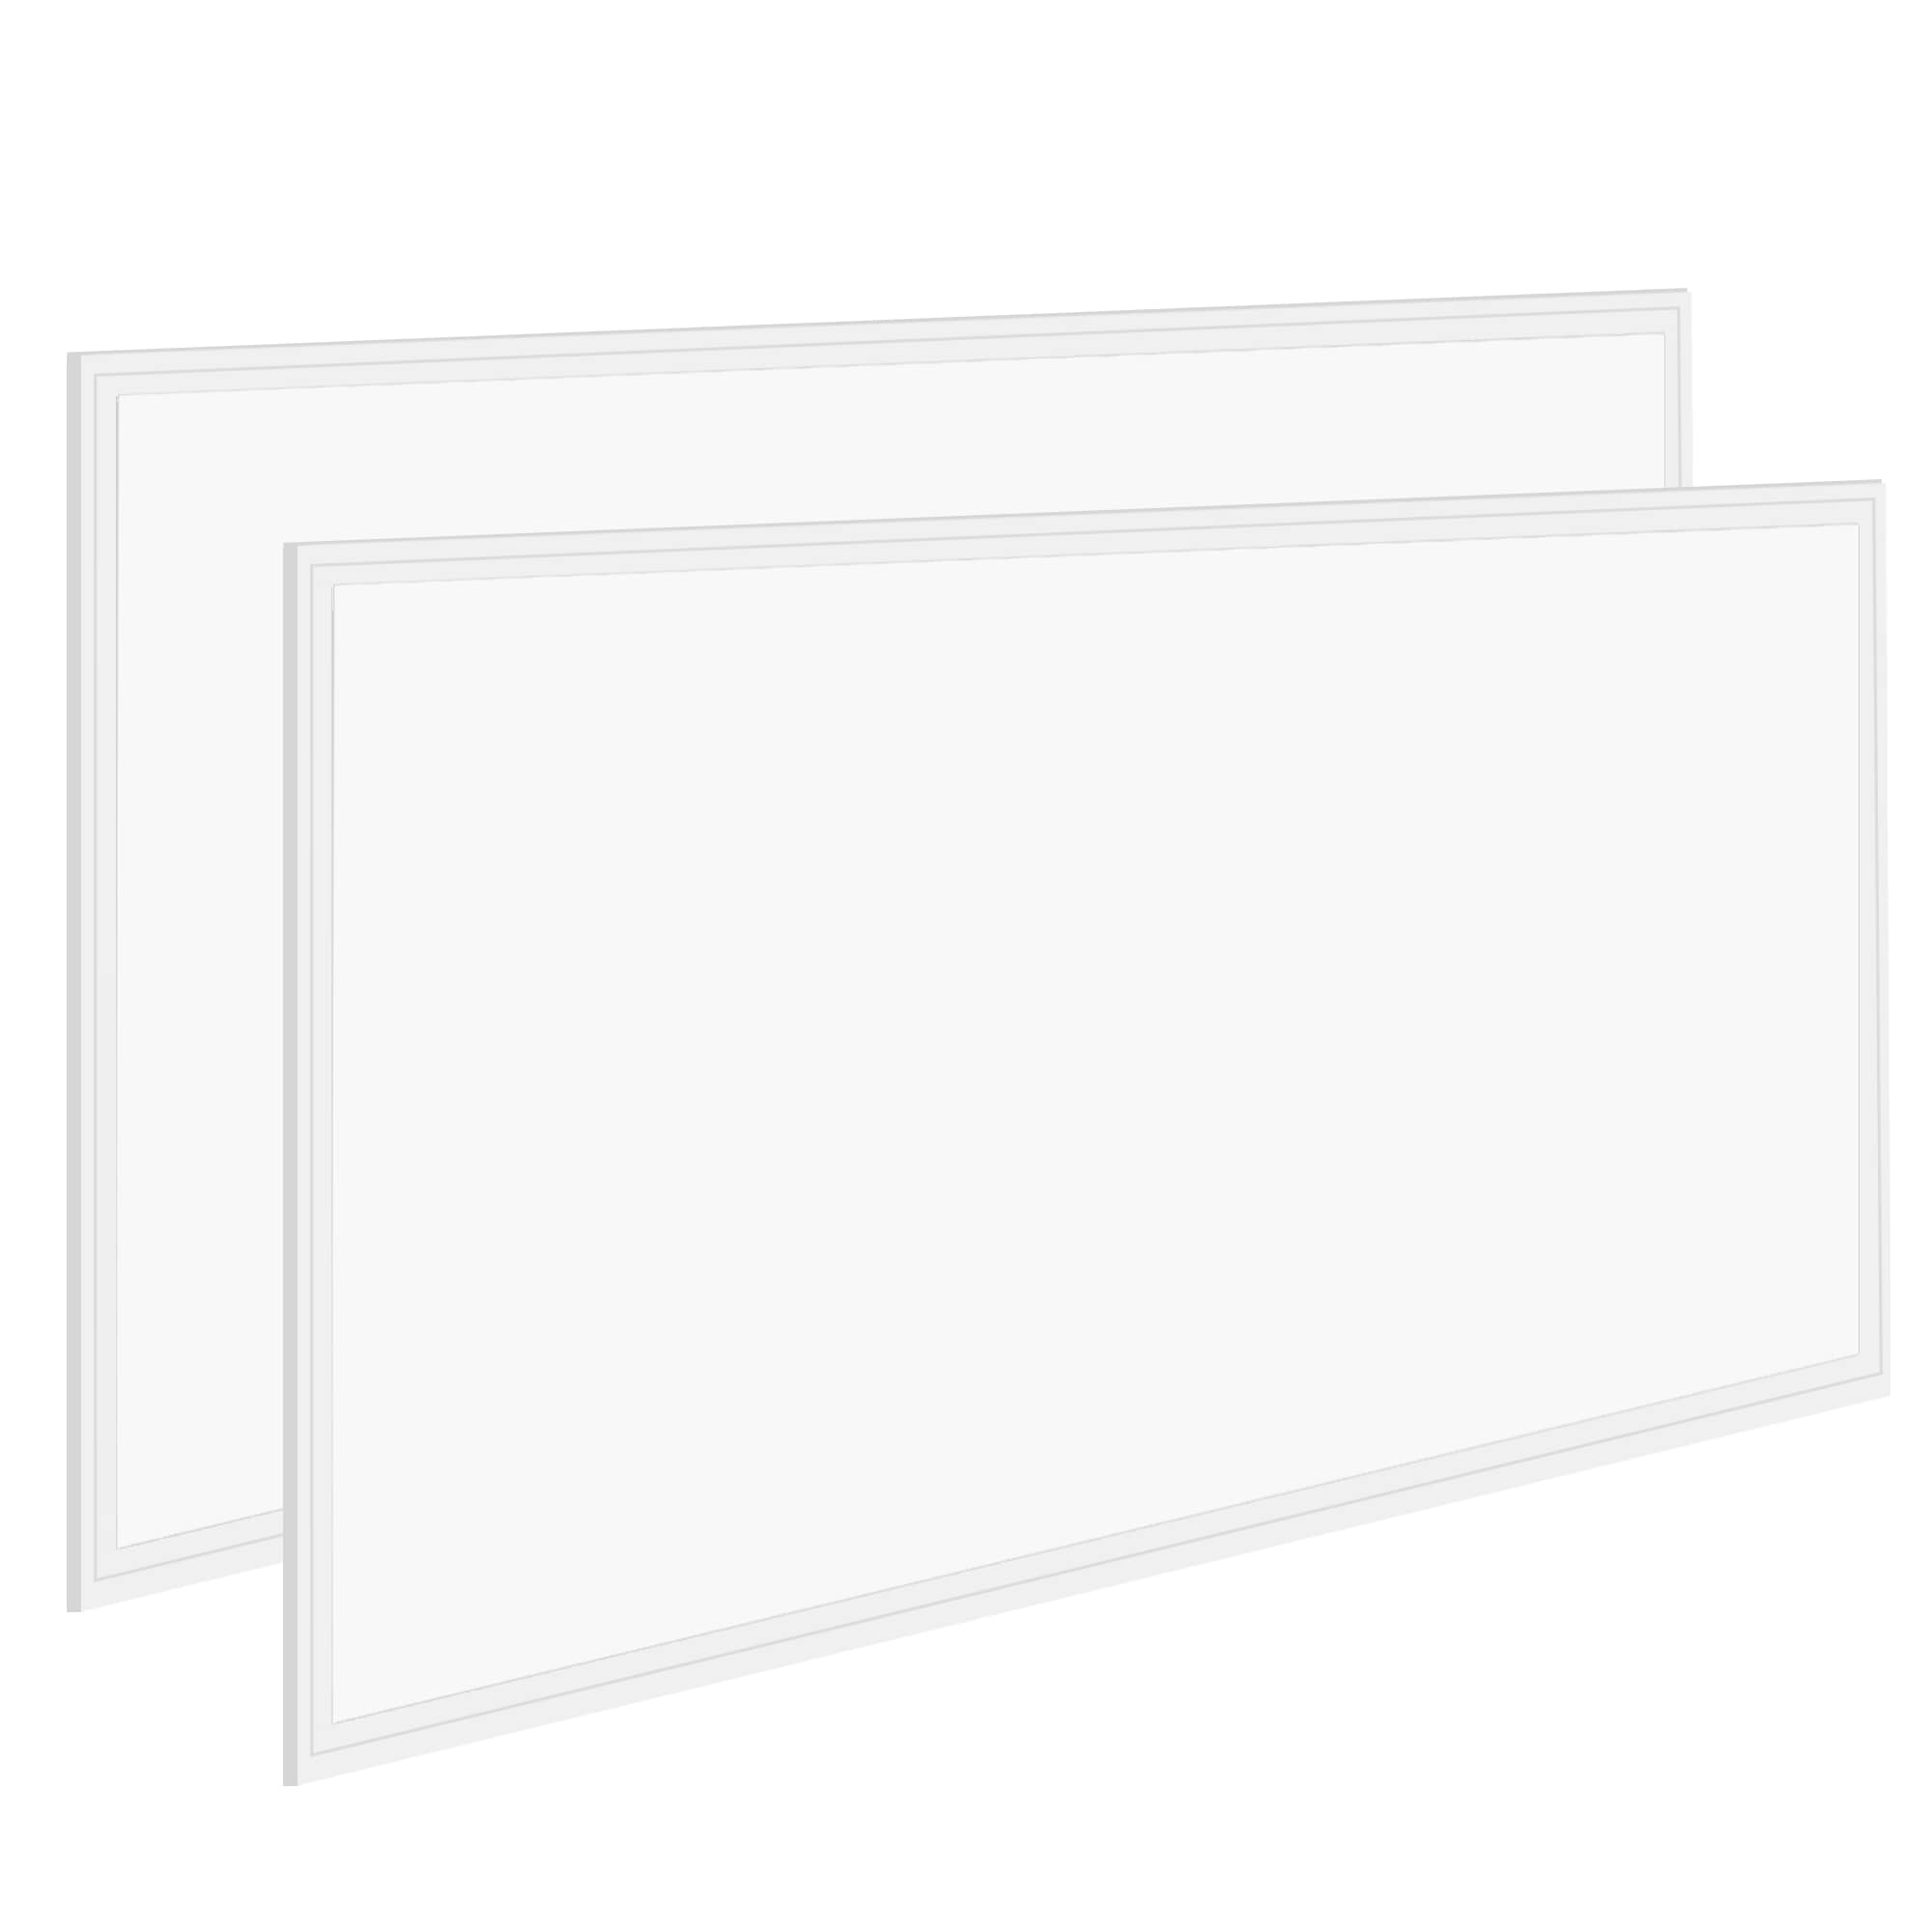 WYZM 24-in x 48-in Panel Light 2-Pack 400-sq ft Frosted Ceiling Panels in the Ceiling Light Panels at Lowes.com